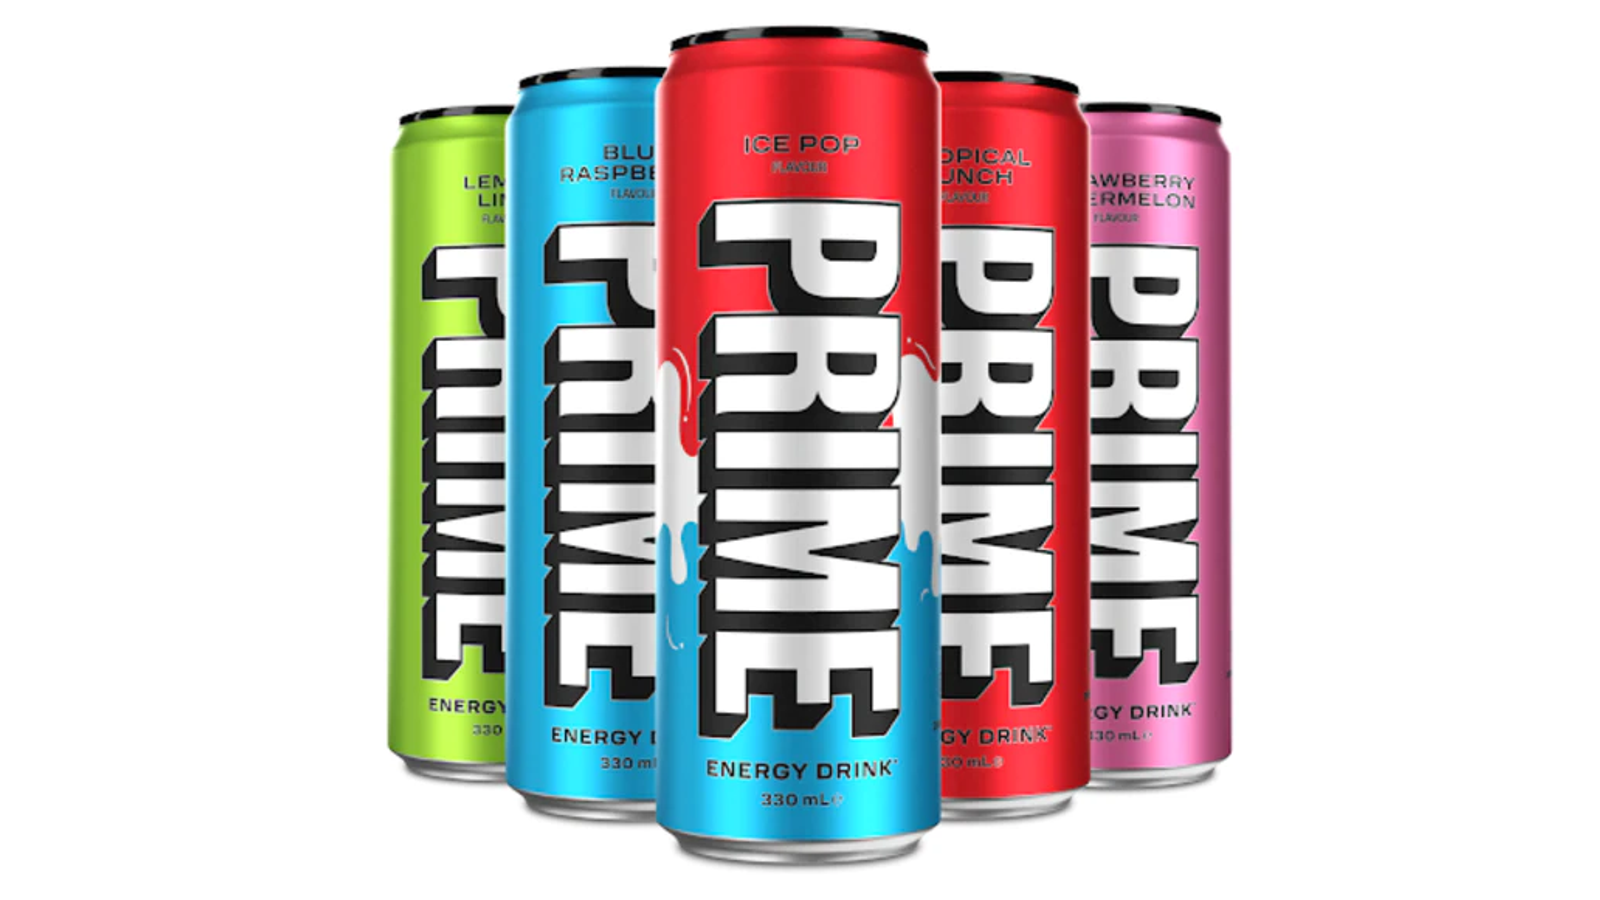 Prime Energy: US food agency asked to investigate Logan Paul and KSI's drink over caffeine levels